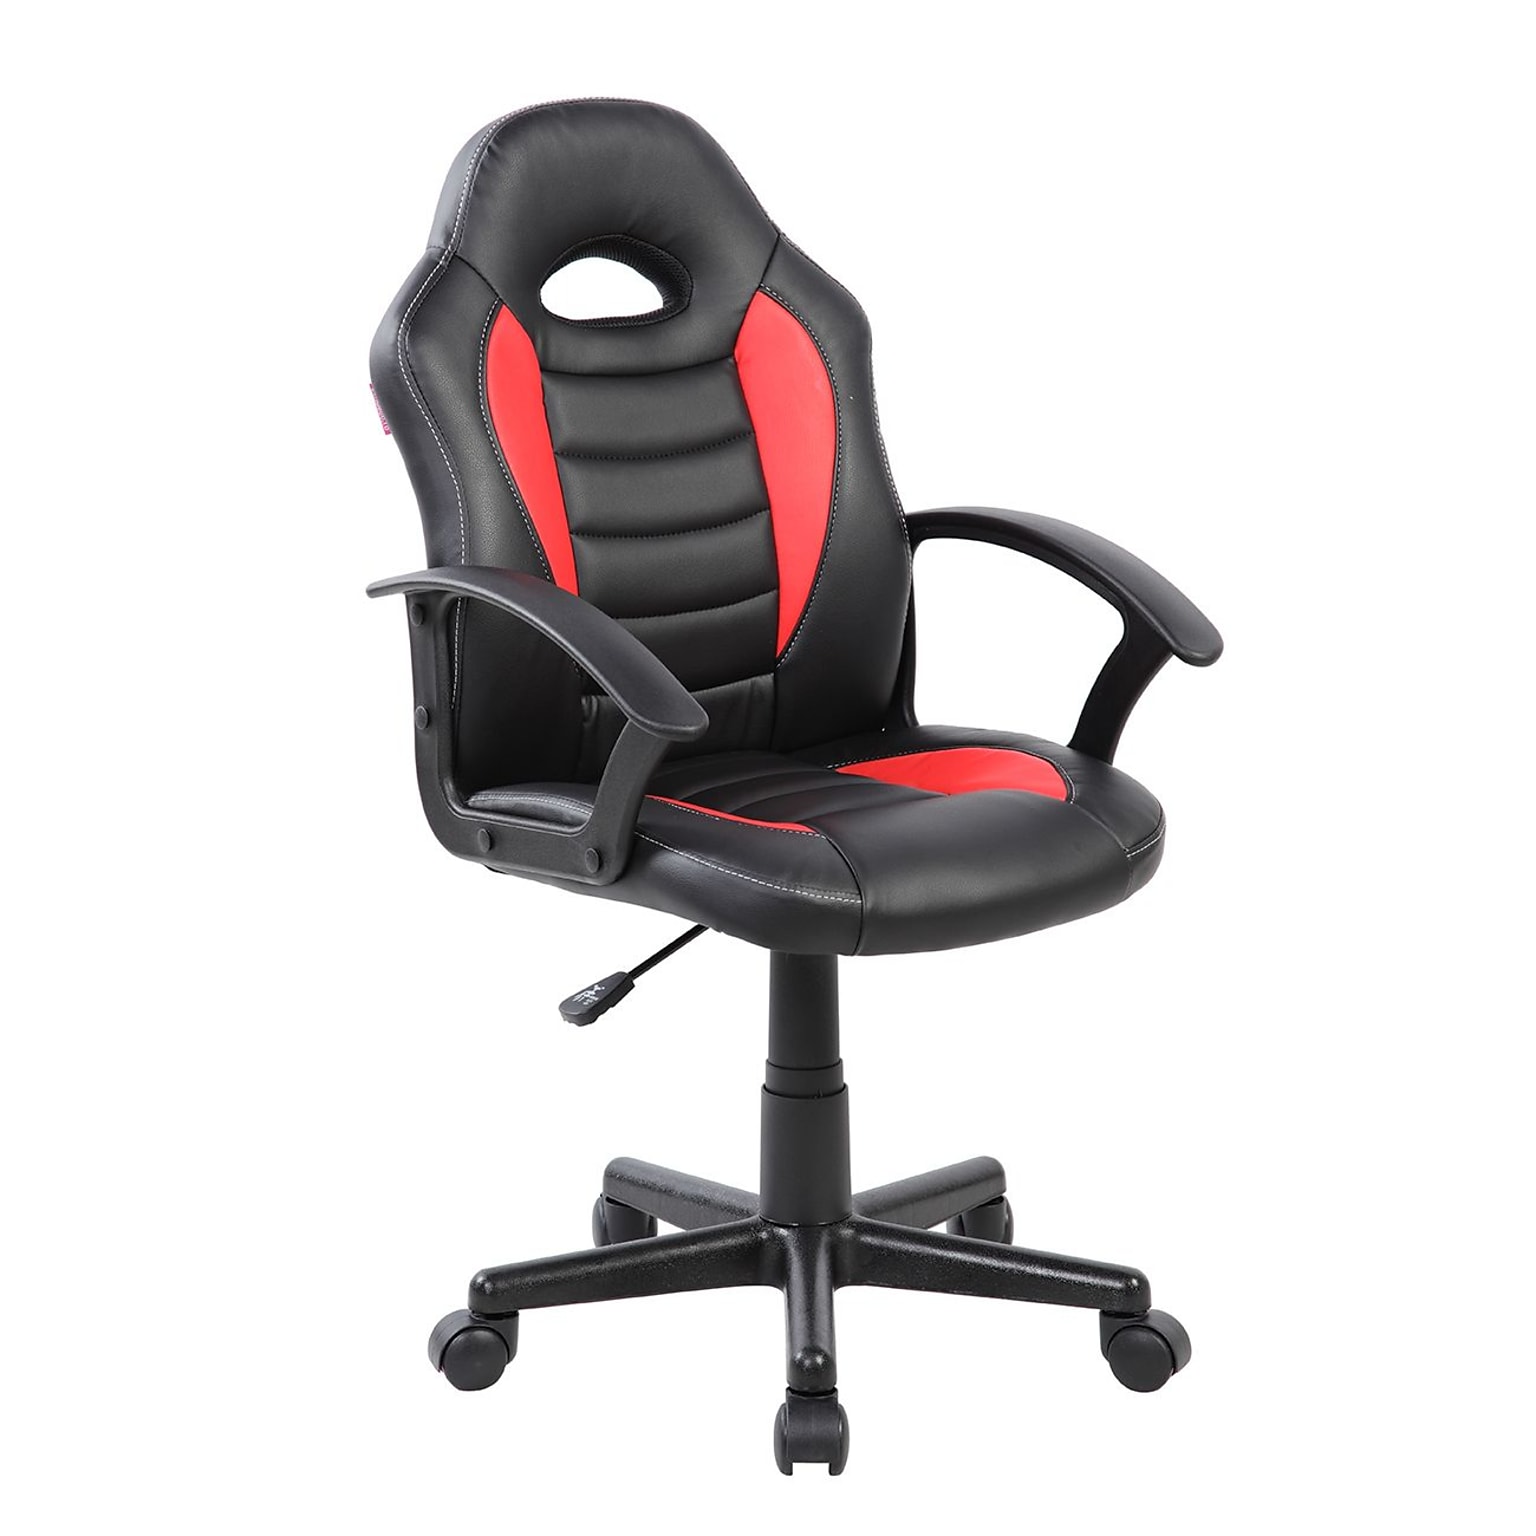 Techni Mobili Kids Gaming and Student Racer Chair, Red (RTA-KS40-RED)